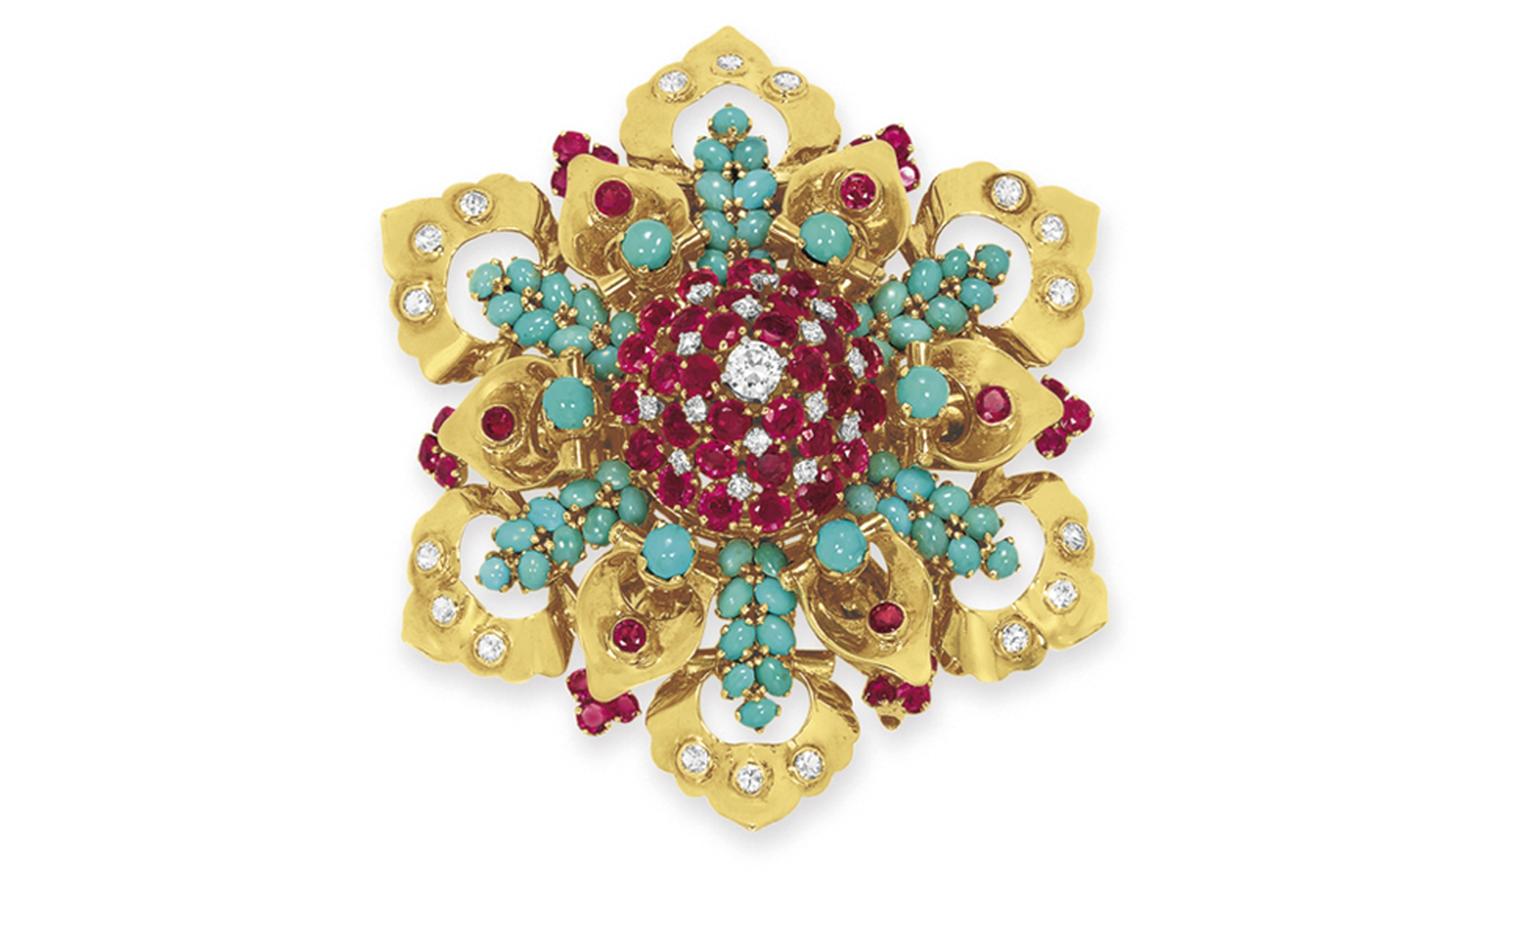 Lot 10. A diamond, ruby, turquoise and gold brooch, by John Rubel Co. Estimate 3,000 - 5,000 U.S. dollars